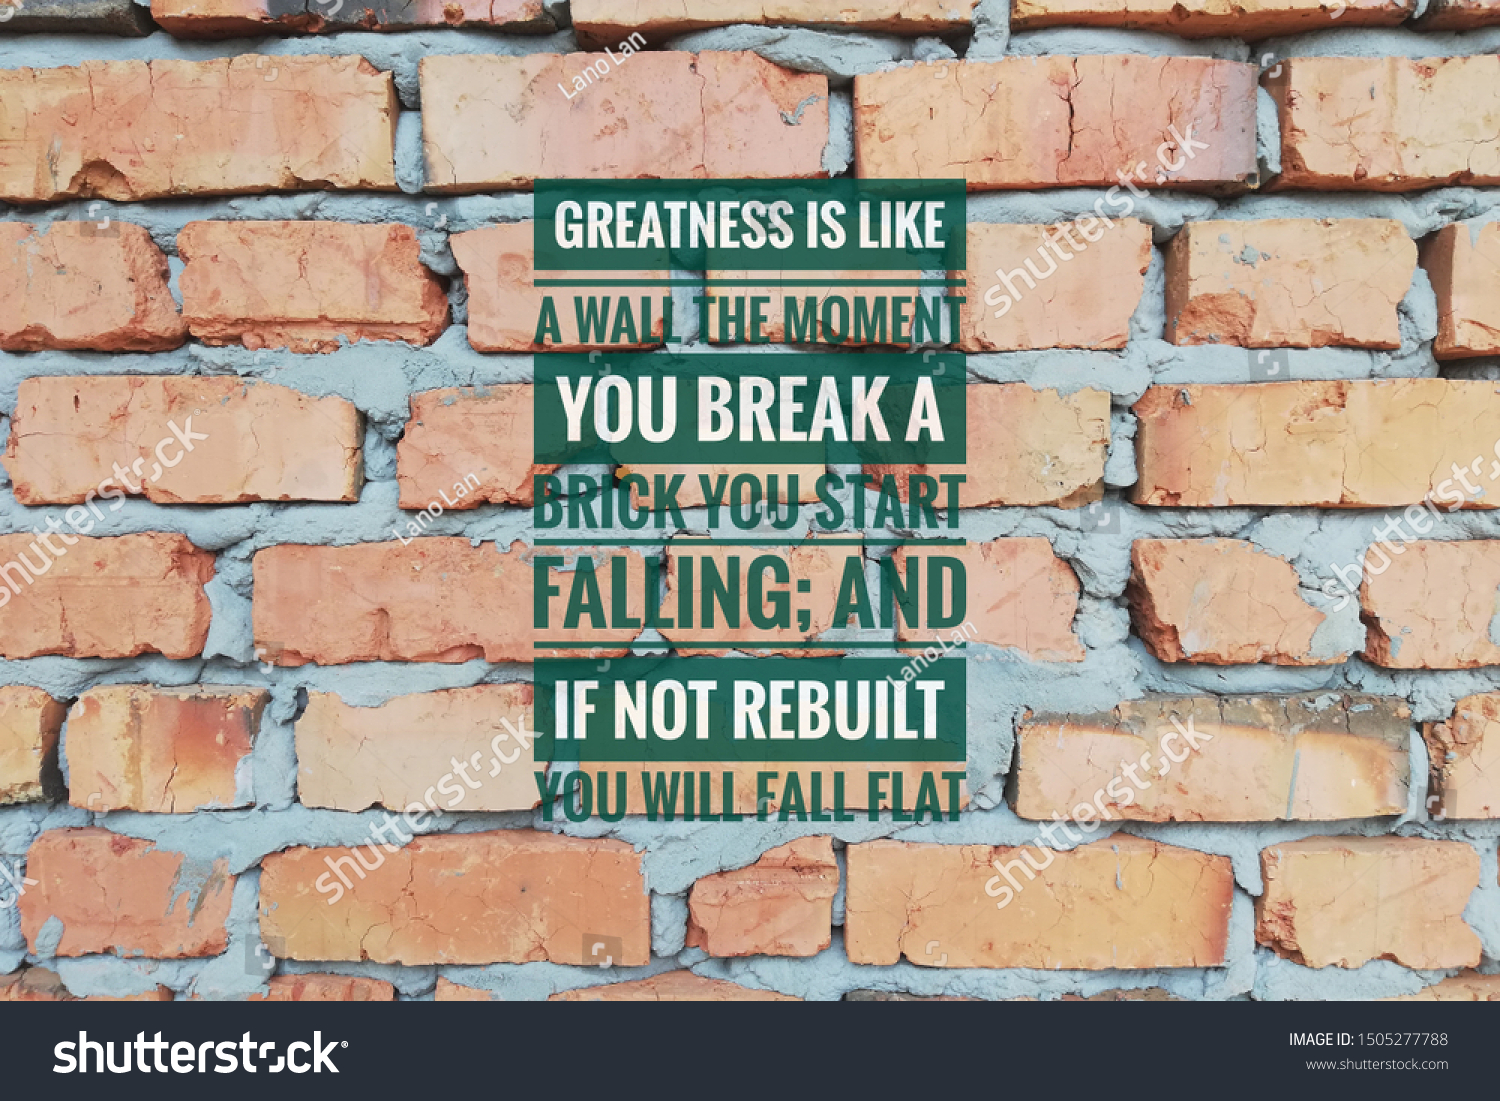 Image Brick Wall Inspirational Quote Greatness Stock Photo Edit Now 1505277788